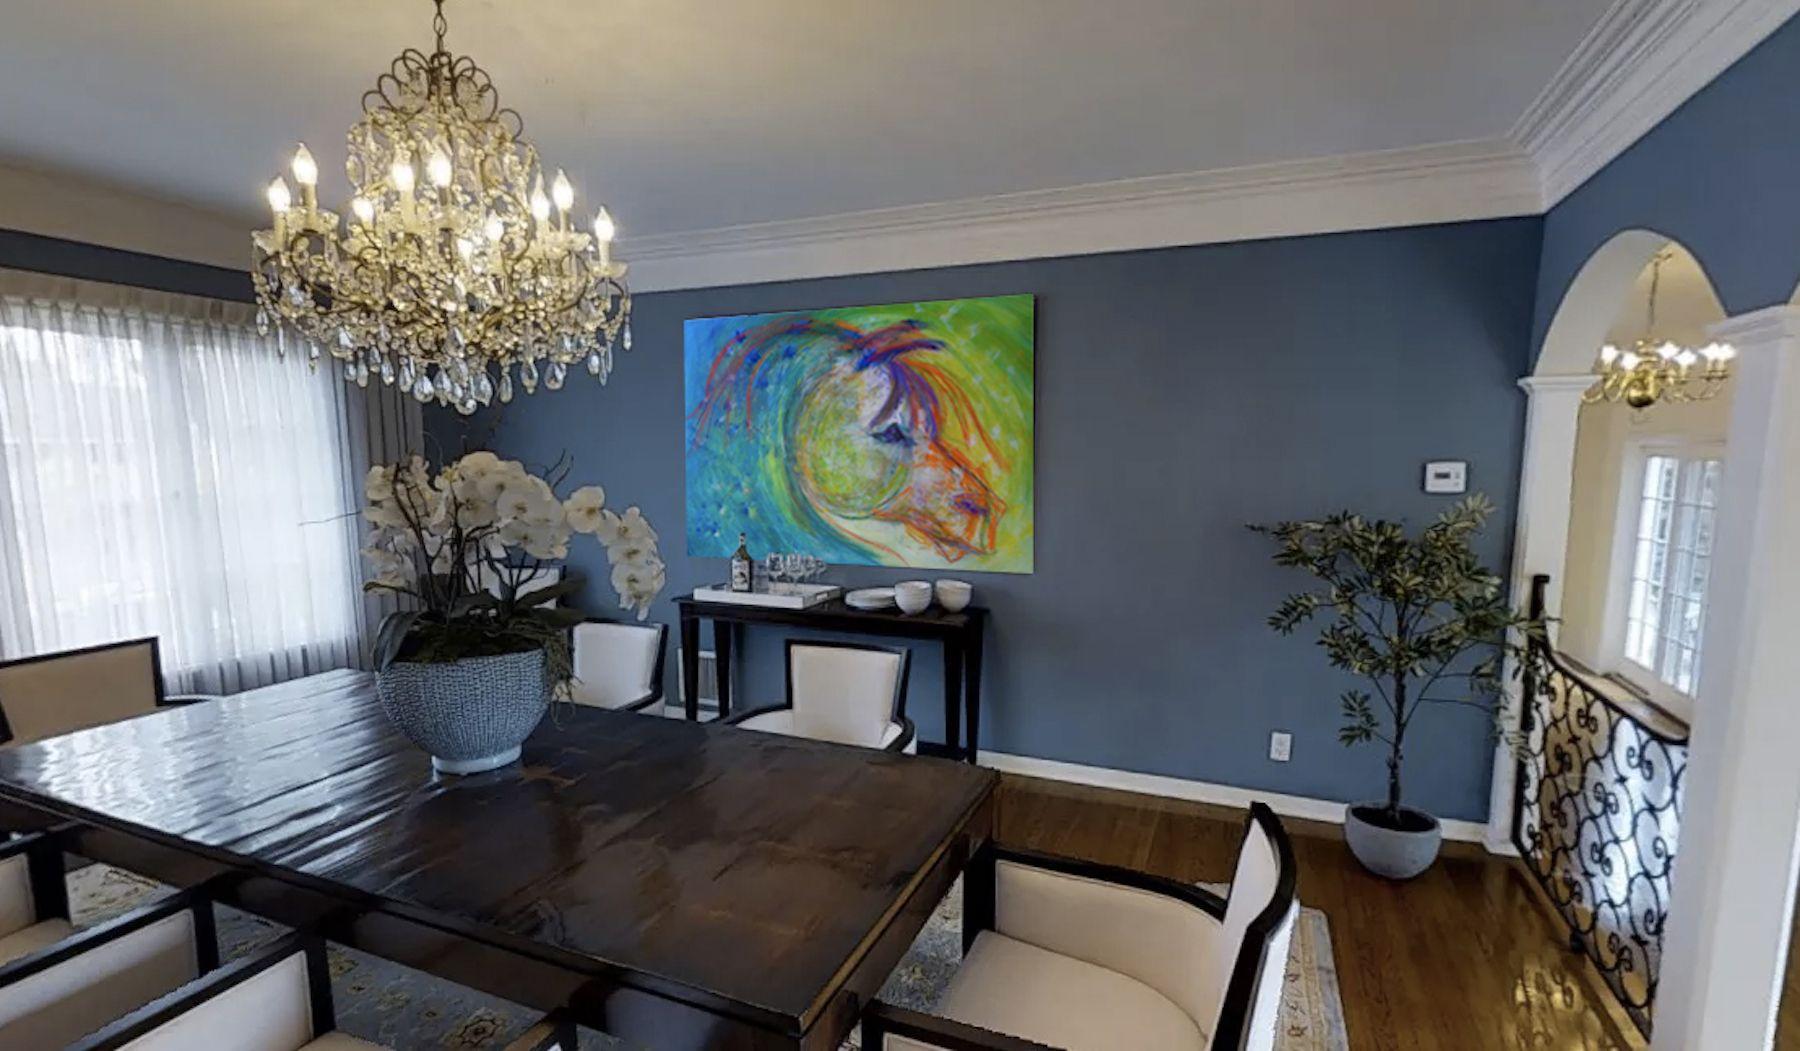 Mixed media acrylics of contemporary equestrian art - stylized horse, colorful and energetic - designed fr the modern home - dynamic brilliant color :: Painting :: Contemporary :: This piece comes with an official certificate of authenticity signed